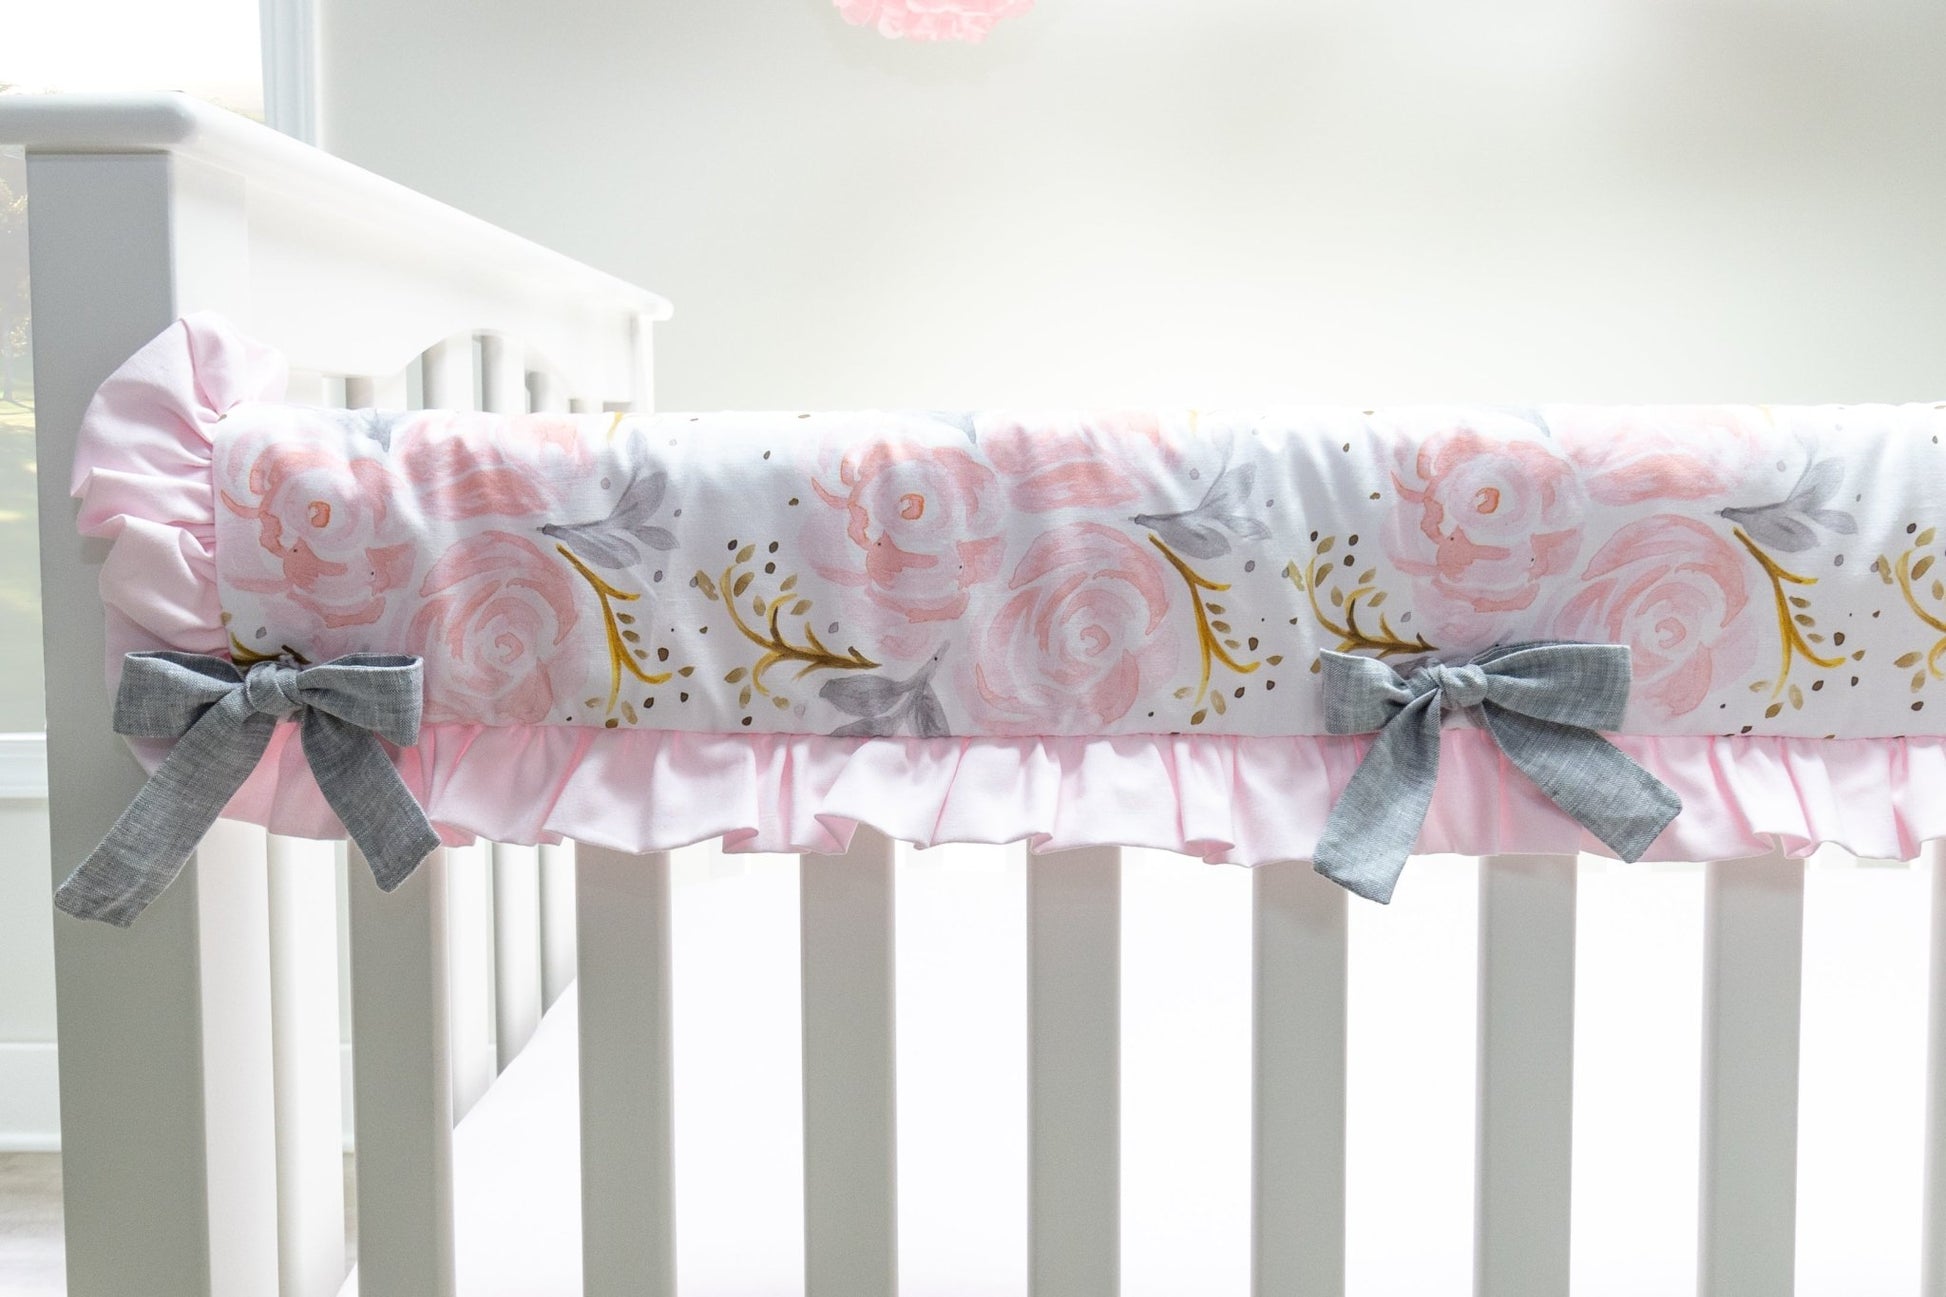 Pink and Gray Rose Crib Rail Cover - New Arrivals Inc